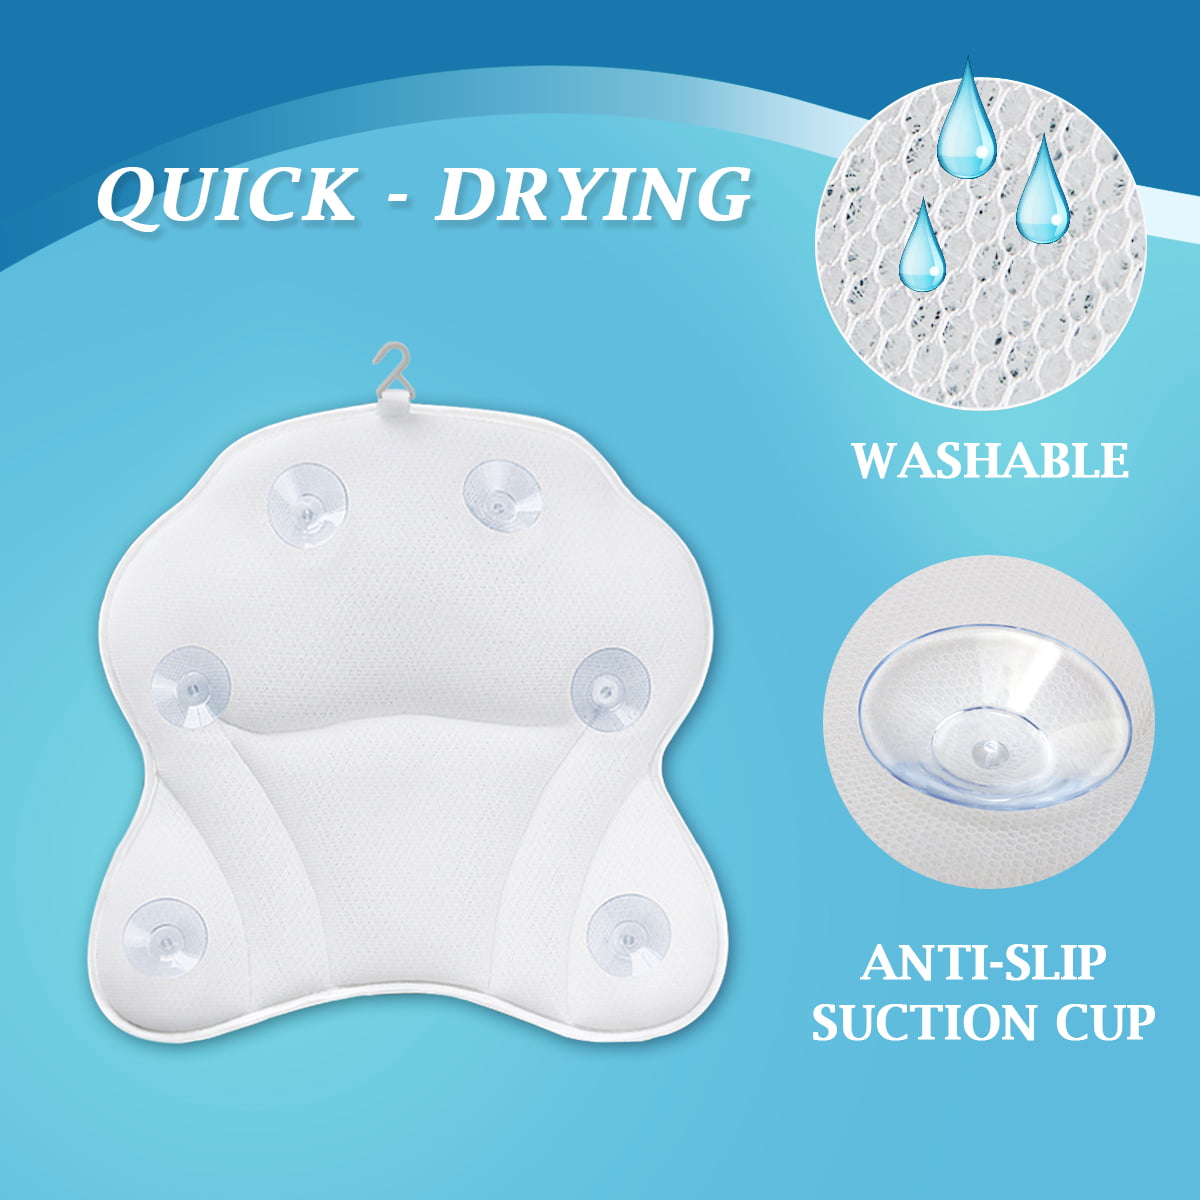 Yilibing Bathtub Pillow for Neck and Shoulder: Spa Bathroom Accessories Bath Pillow for Bathtub with Suction Cups,as A Best Gift for Family and Friends, White